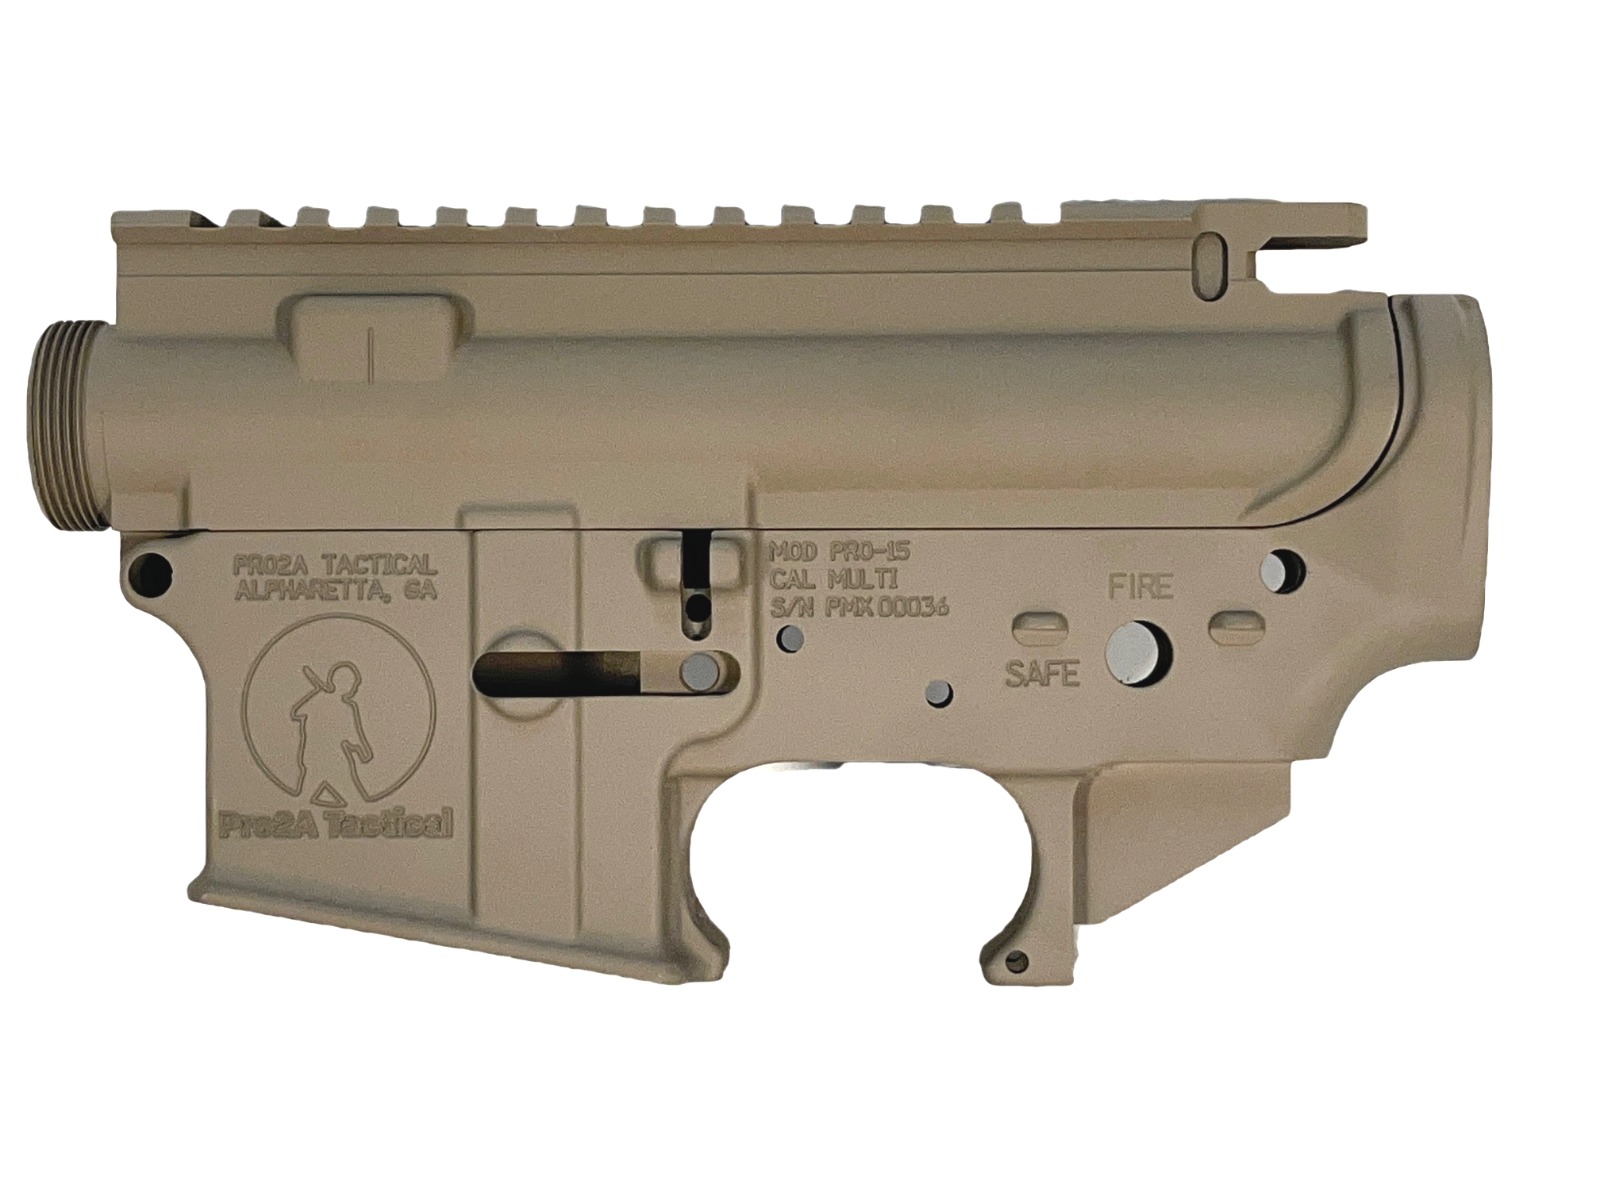 Pro2a Tactical FDE AR-15 Stripped Upper / Lower Receiver Set